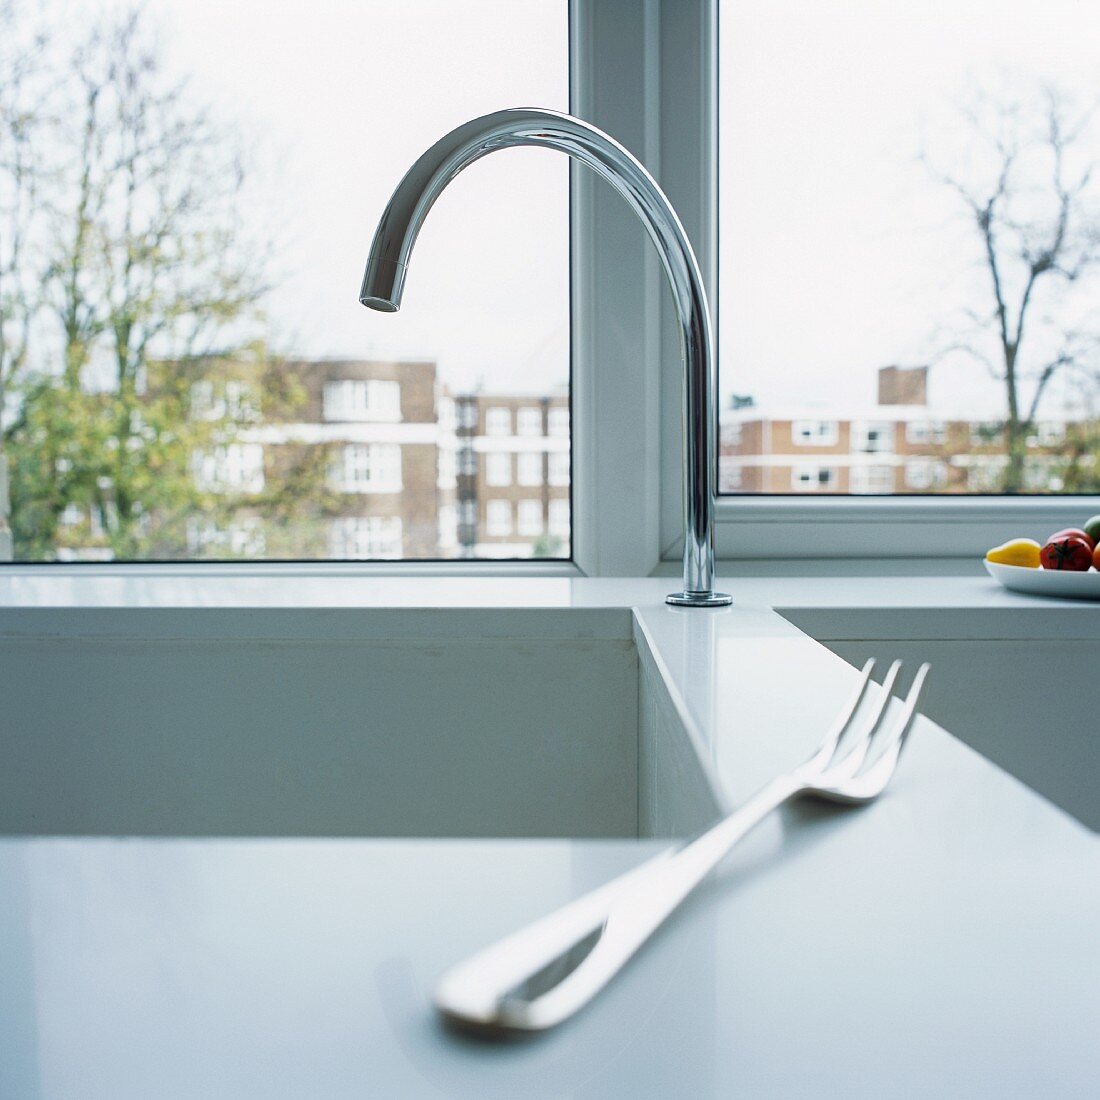 A fork on a sink in front of a window